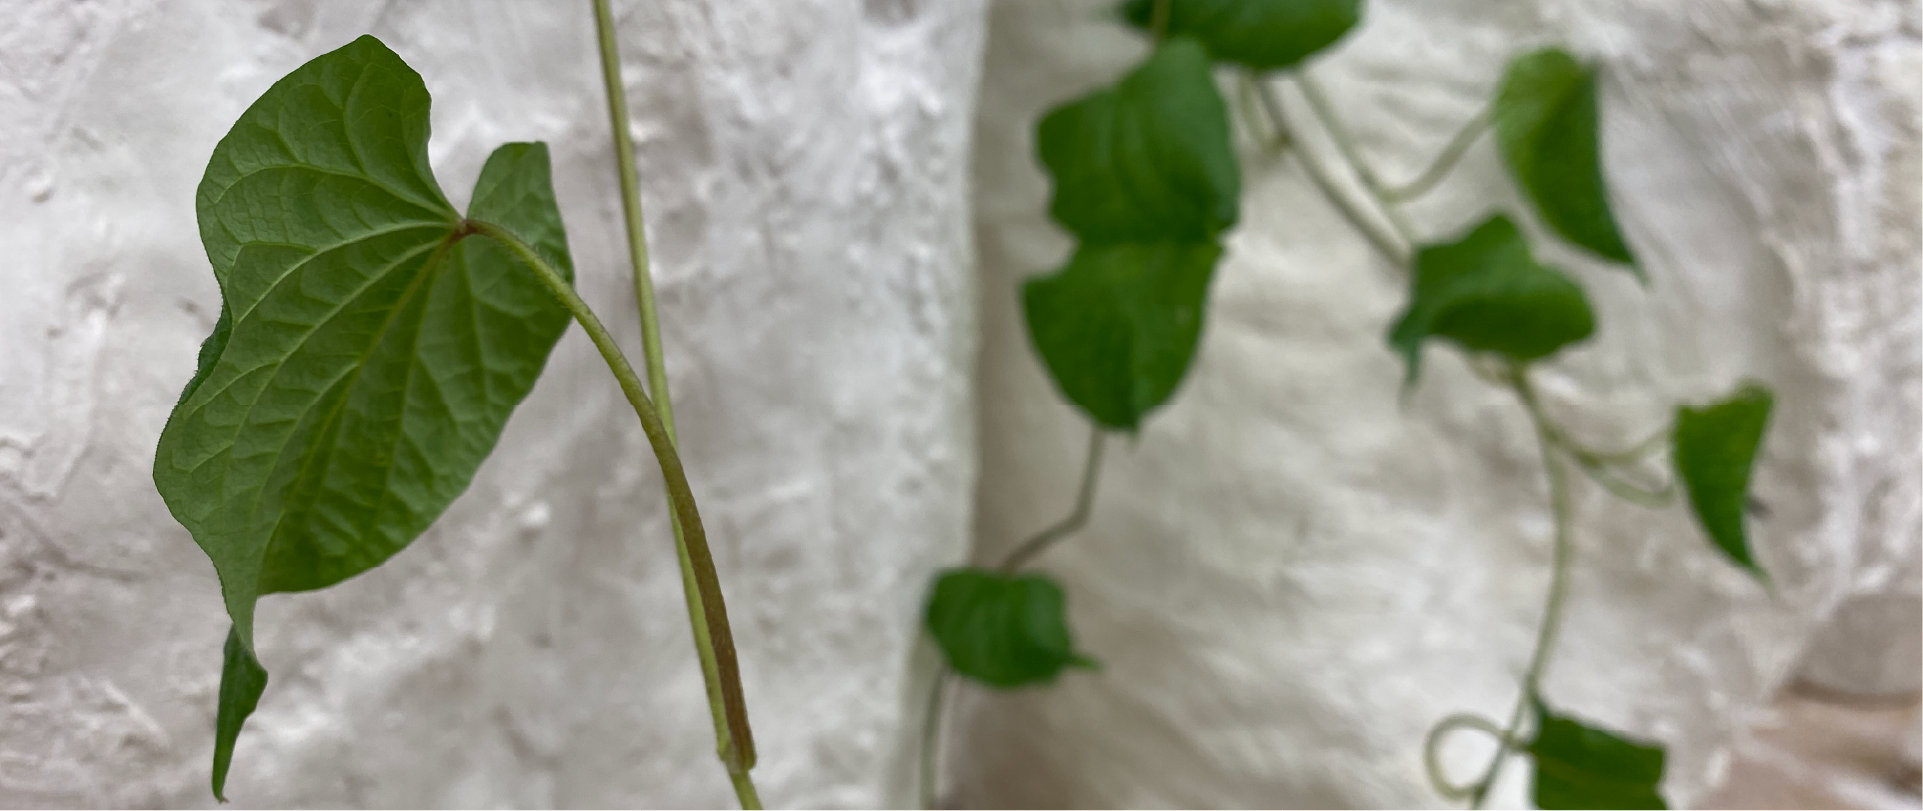 Green sweet potato vines are delicately draped over a curved structure made of plaster cloth. One leaf is in focus on the left half of the image while a small grouping of leaves is in the back and out of focus on the right side of the image